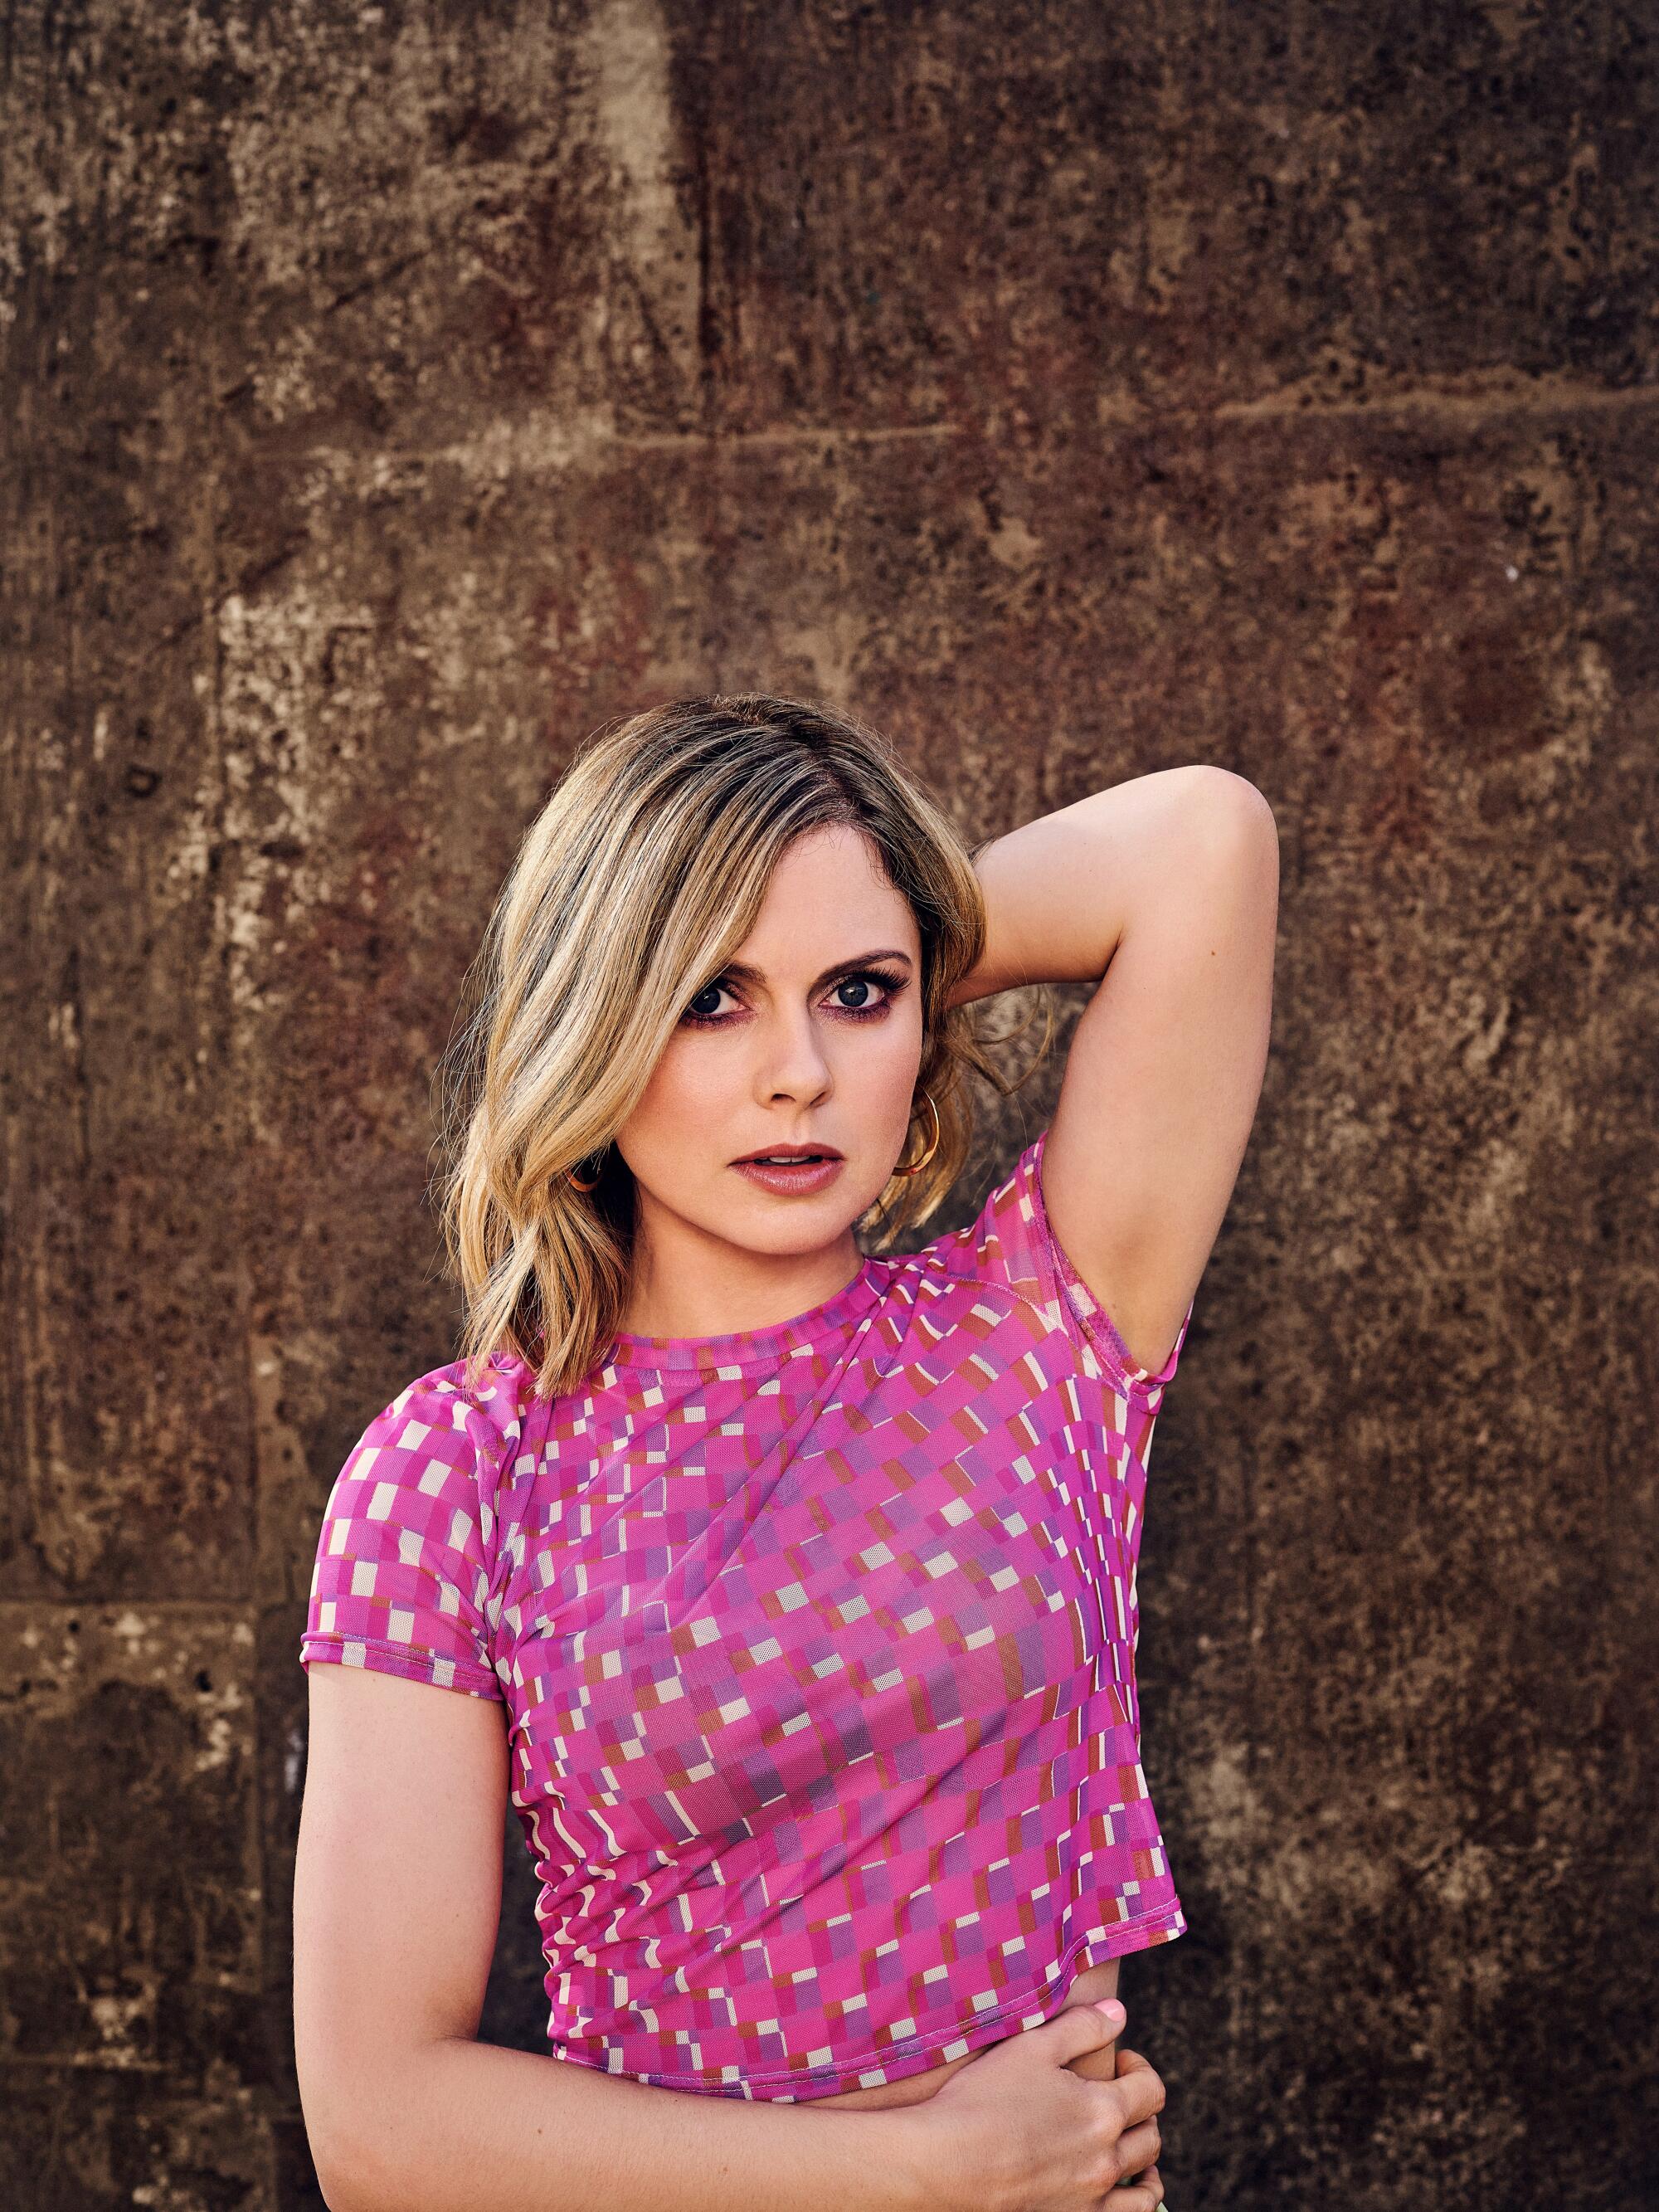 Rose McIver wears a crop top and covers her abdomen with one arm for a portrait.